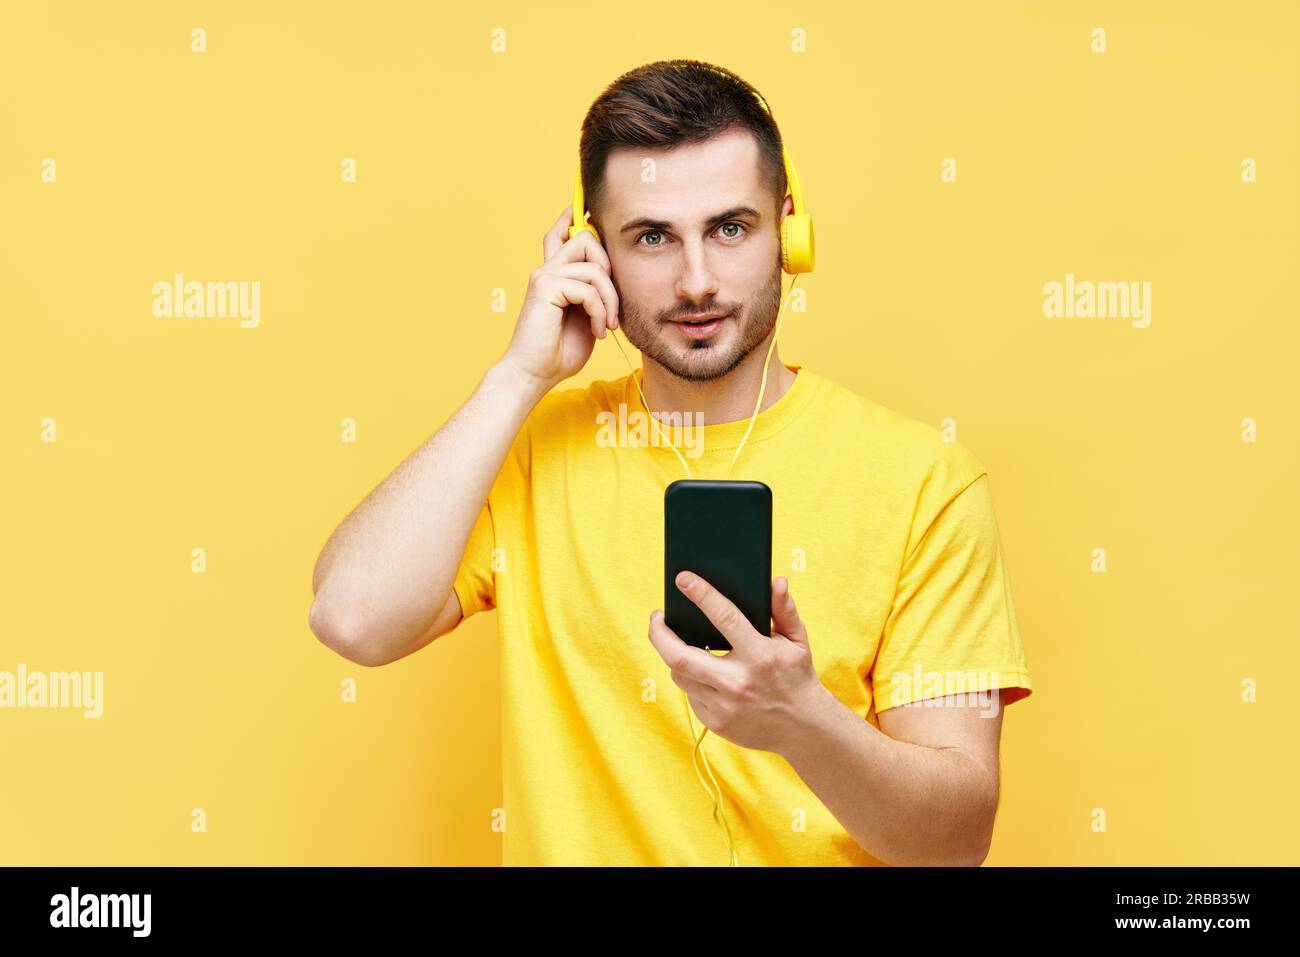 Handsome caucasian man listening to music from his phone and headphones over yellow background Stock Photo